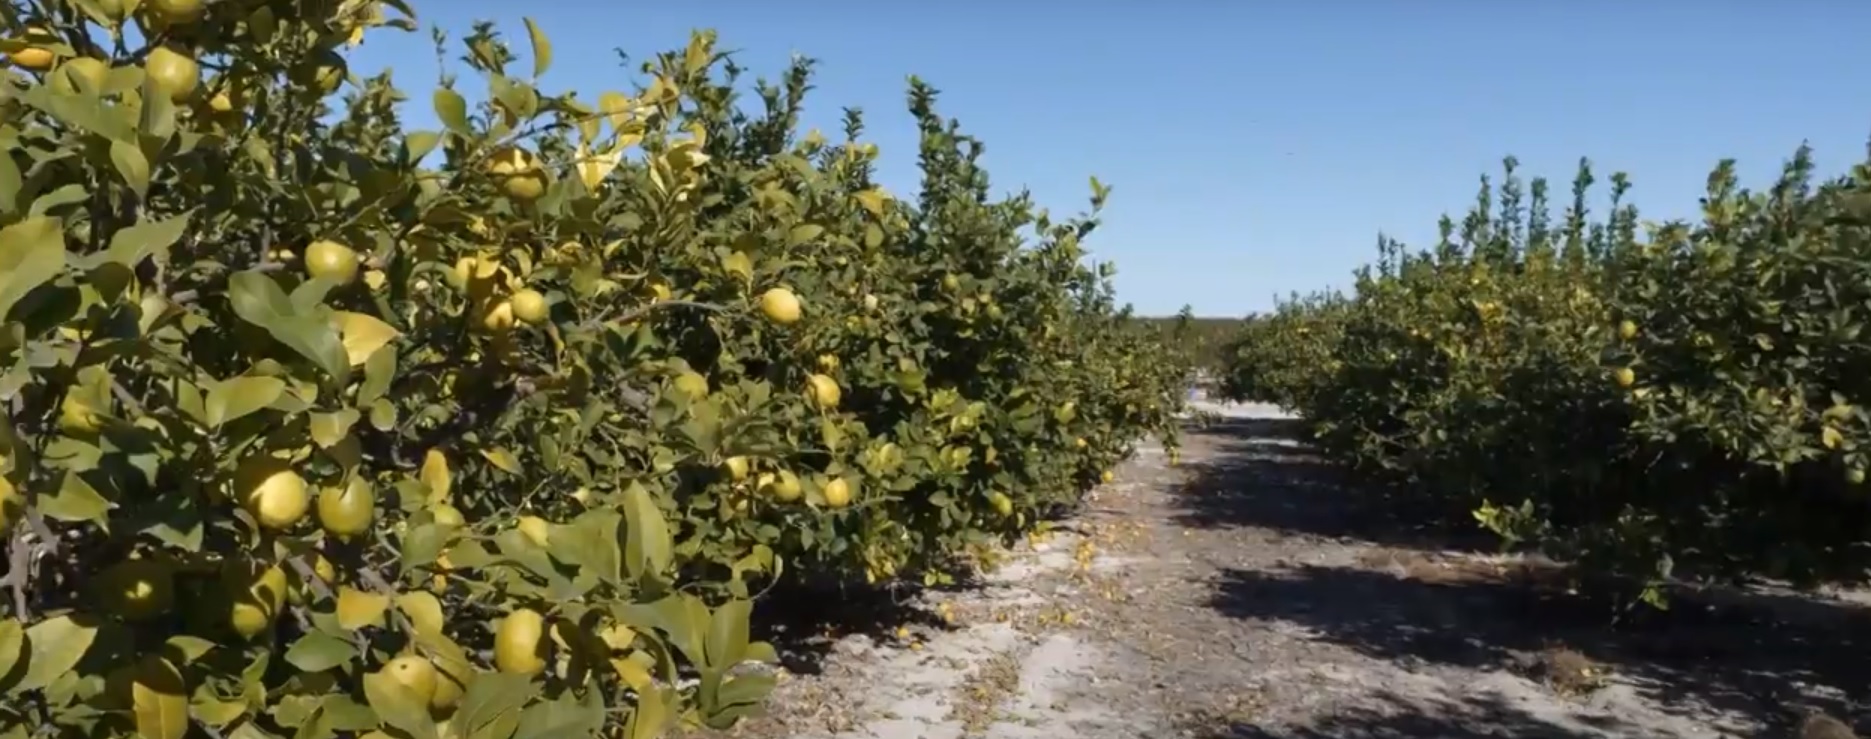 Despite its bone dry climate, water recycling has turned Murcia into the orchard of Europe. The city claims it's the leading provider of fruit and vegetables in the European Union./CGTN.